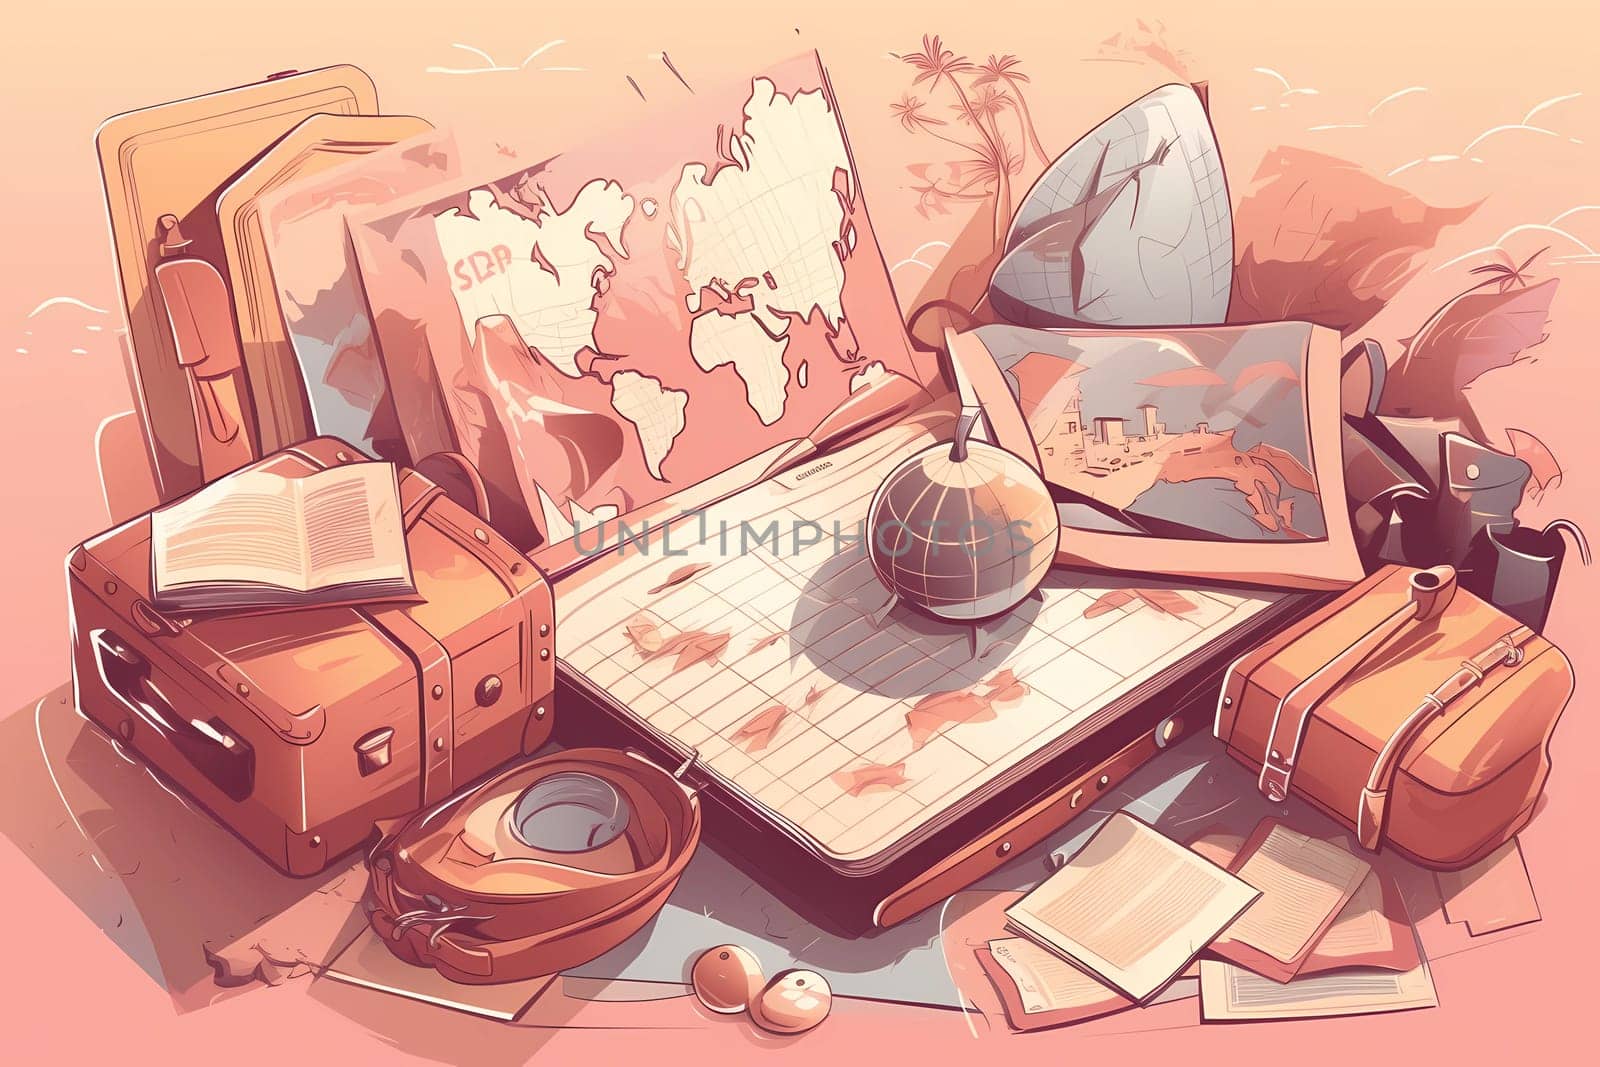 A drawing of a suitcase and a map on a desk.